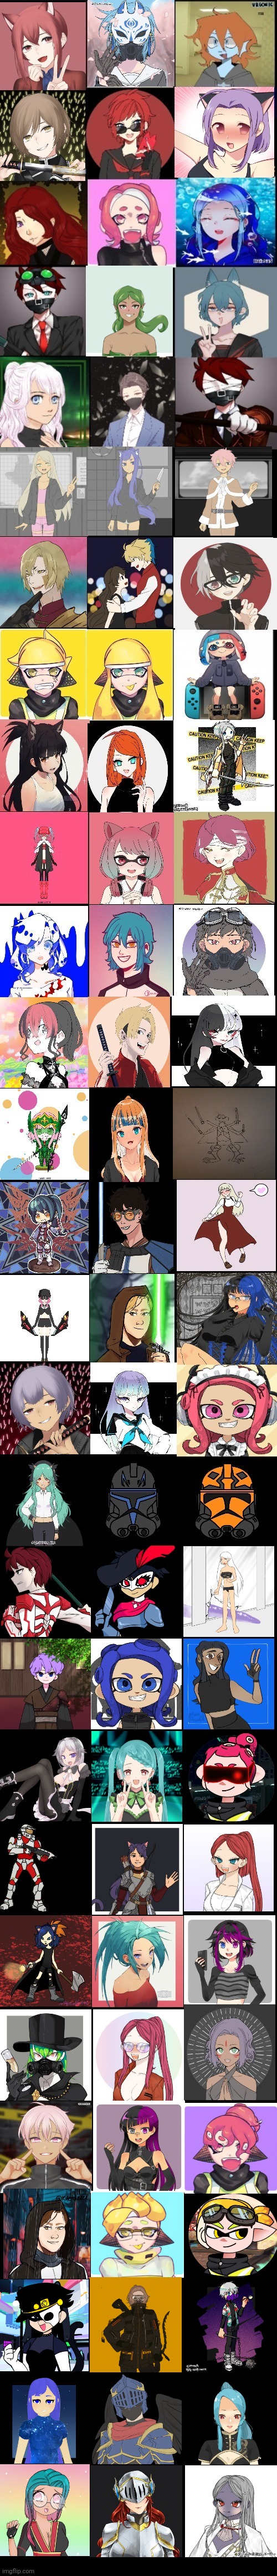 I now have 84 Ocs to rp with (Only 3 ocs you can rp with at once) | made w/ Imgflip meme maker